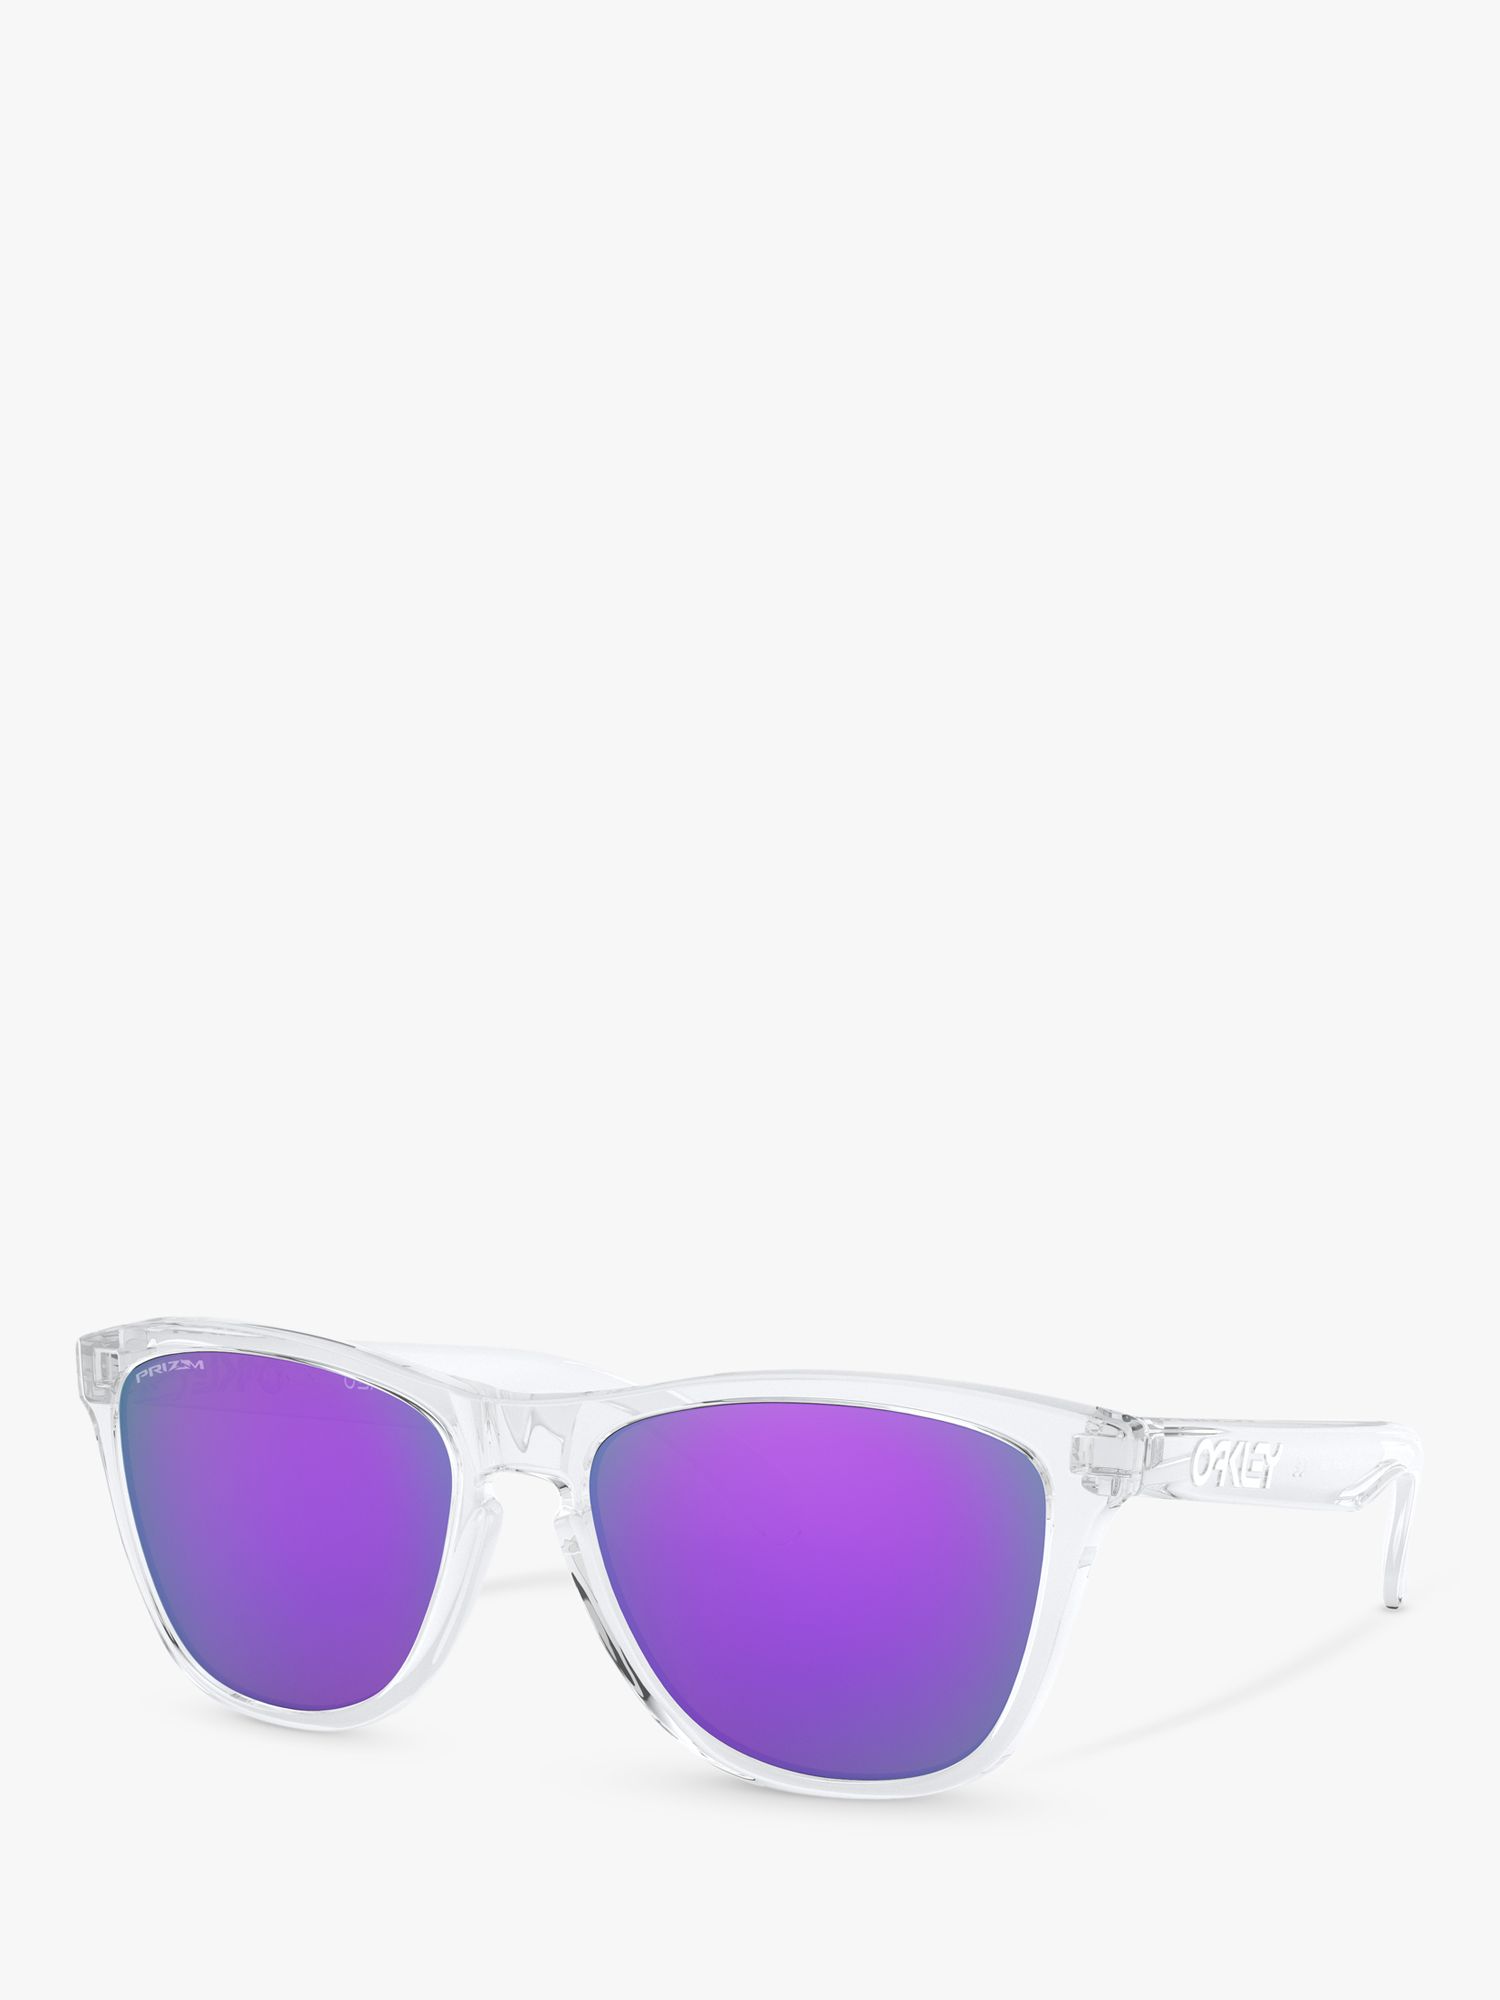 Oakley Oo9013 Men S Frogskins Prizm Square Sunglasses Clear Mirror Purple At John Lewis And Partners